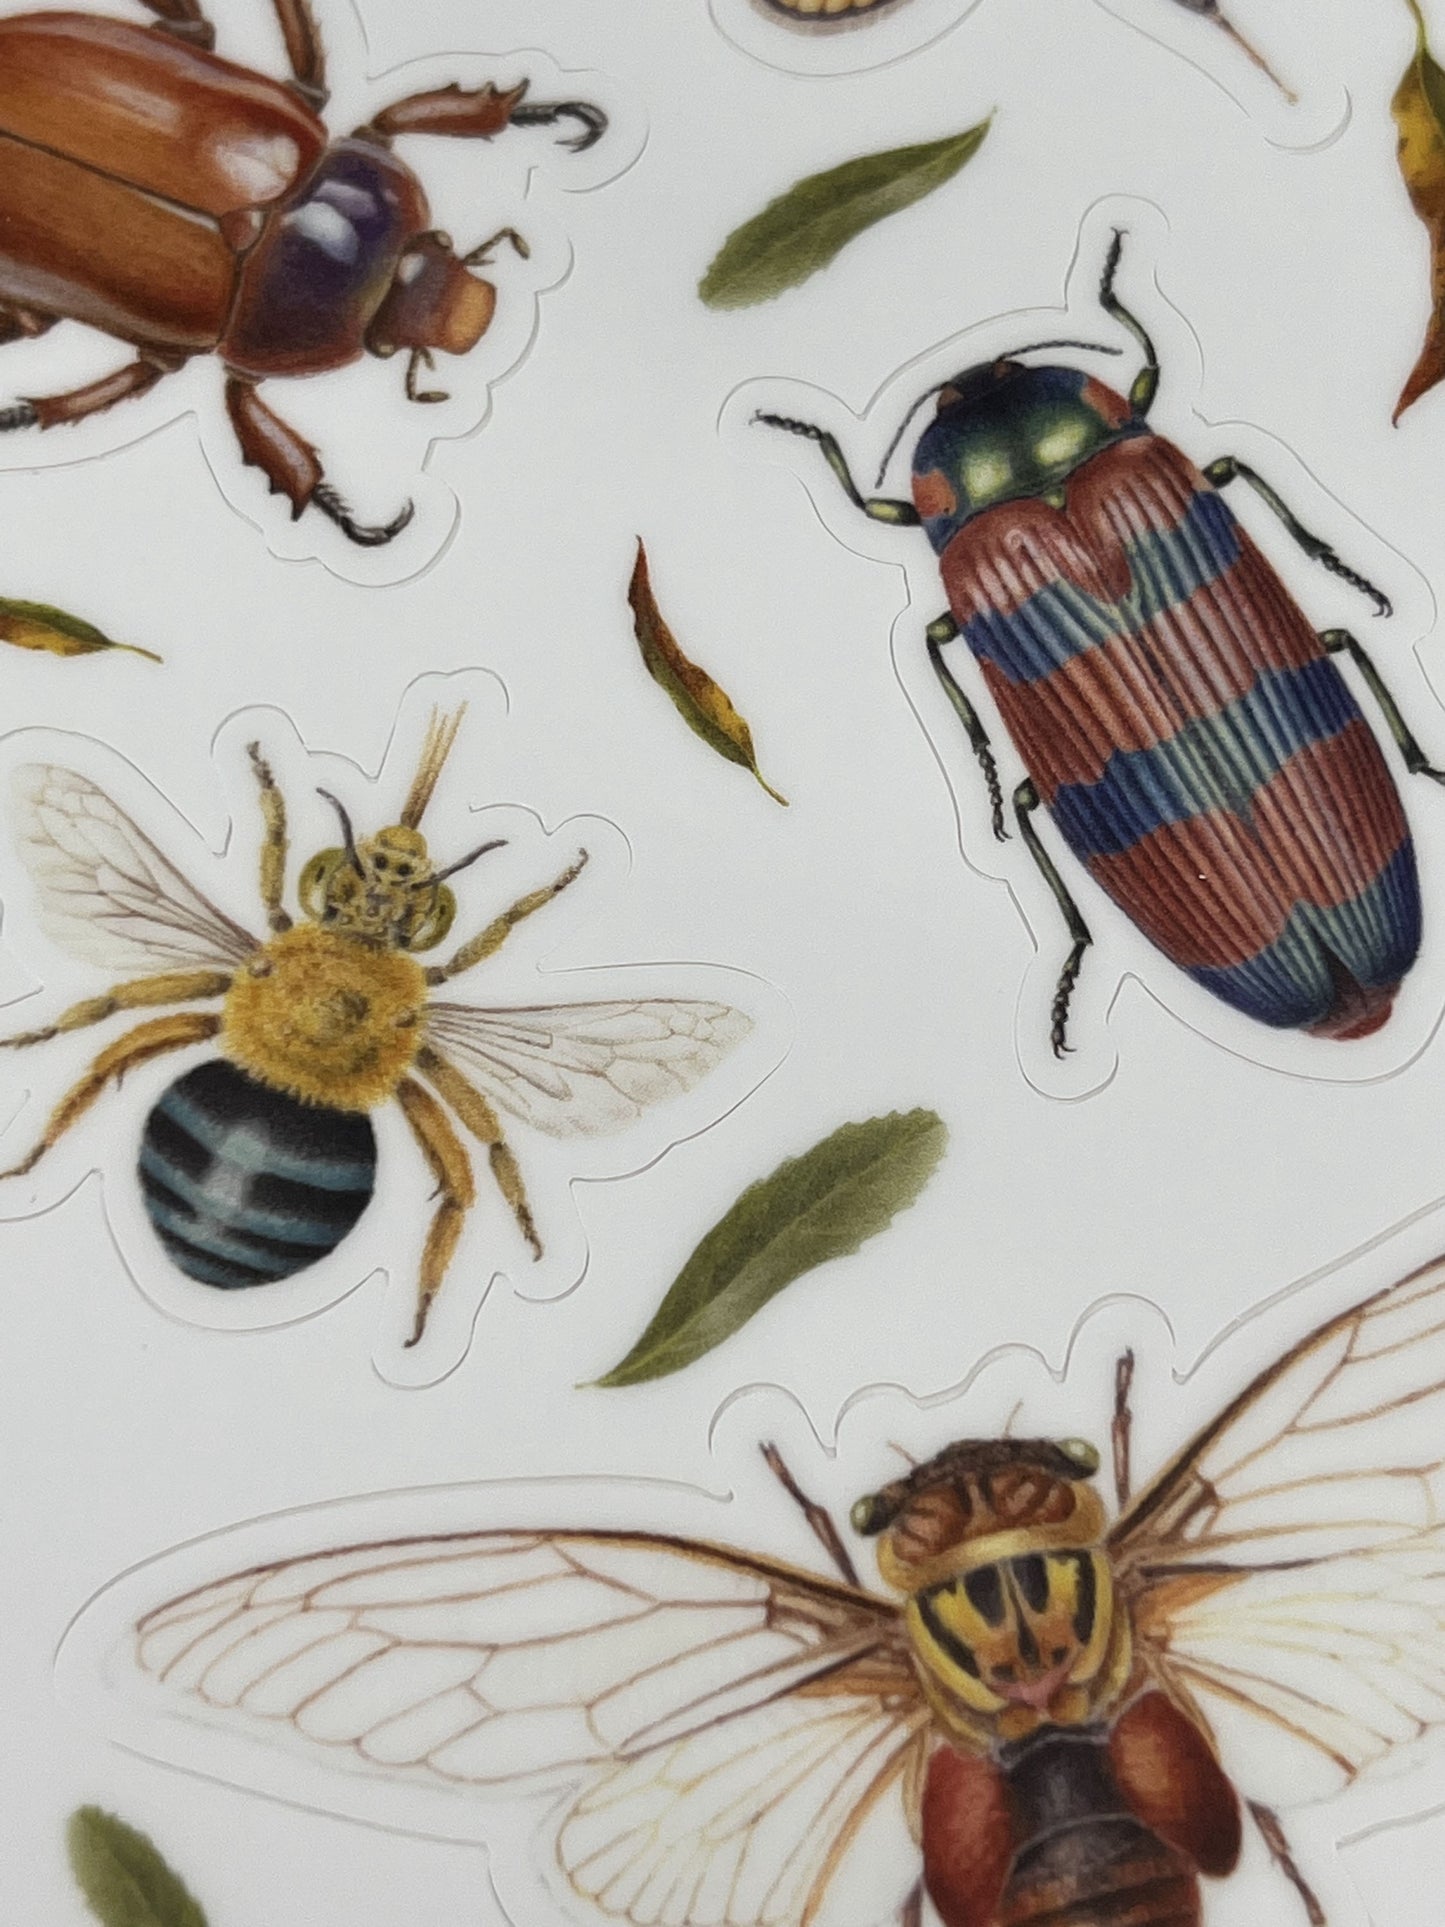 Insects of Australia - Sticker Sheet